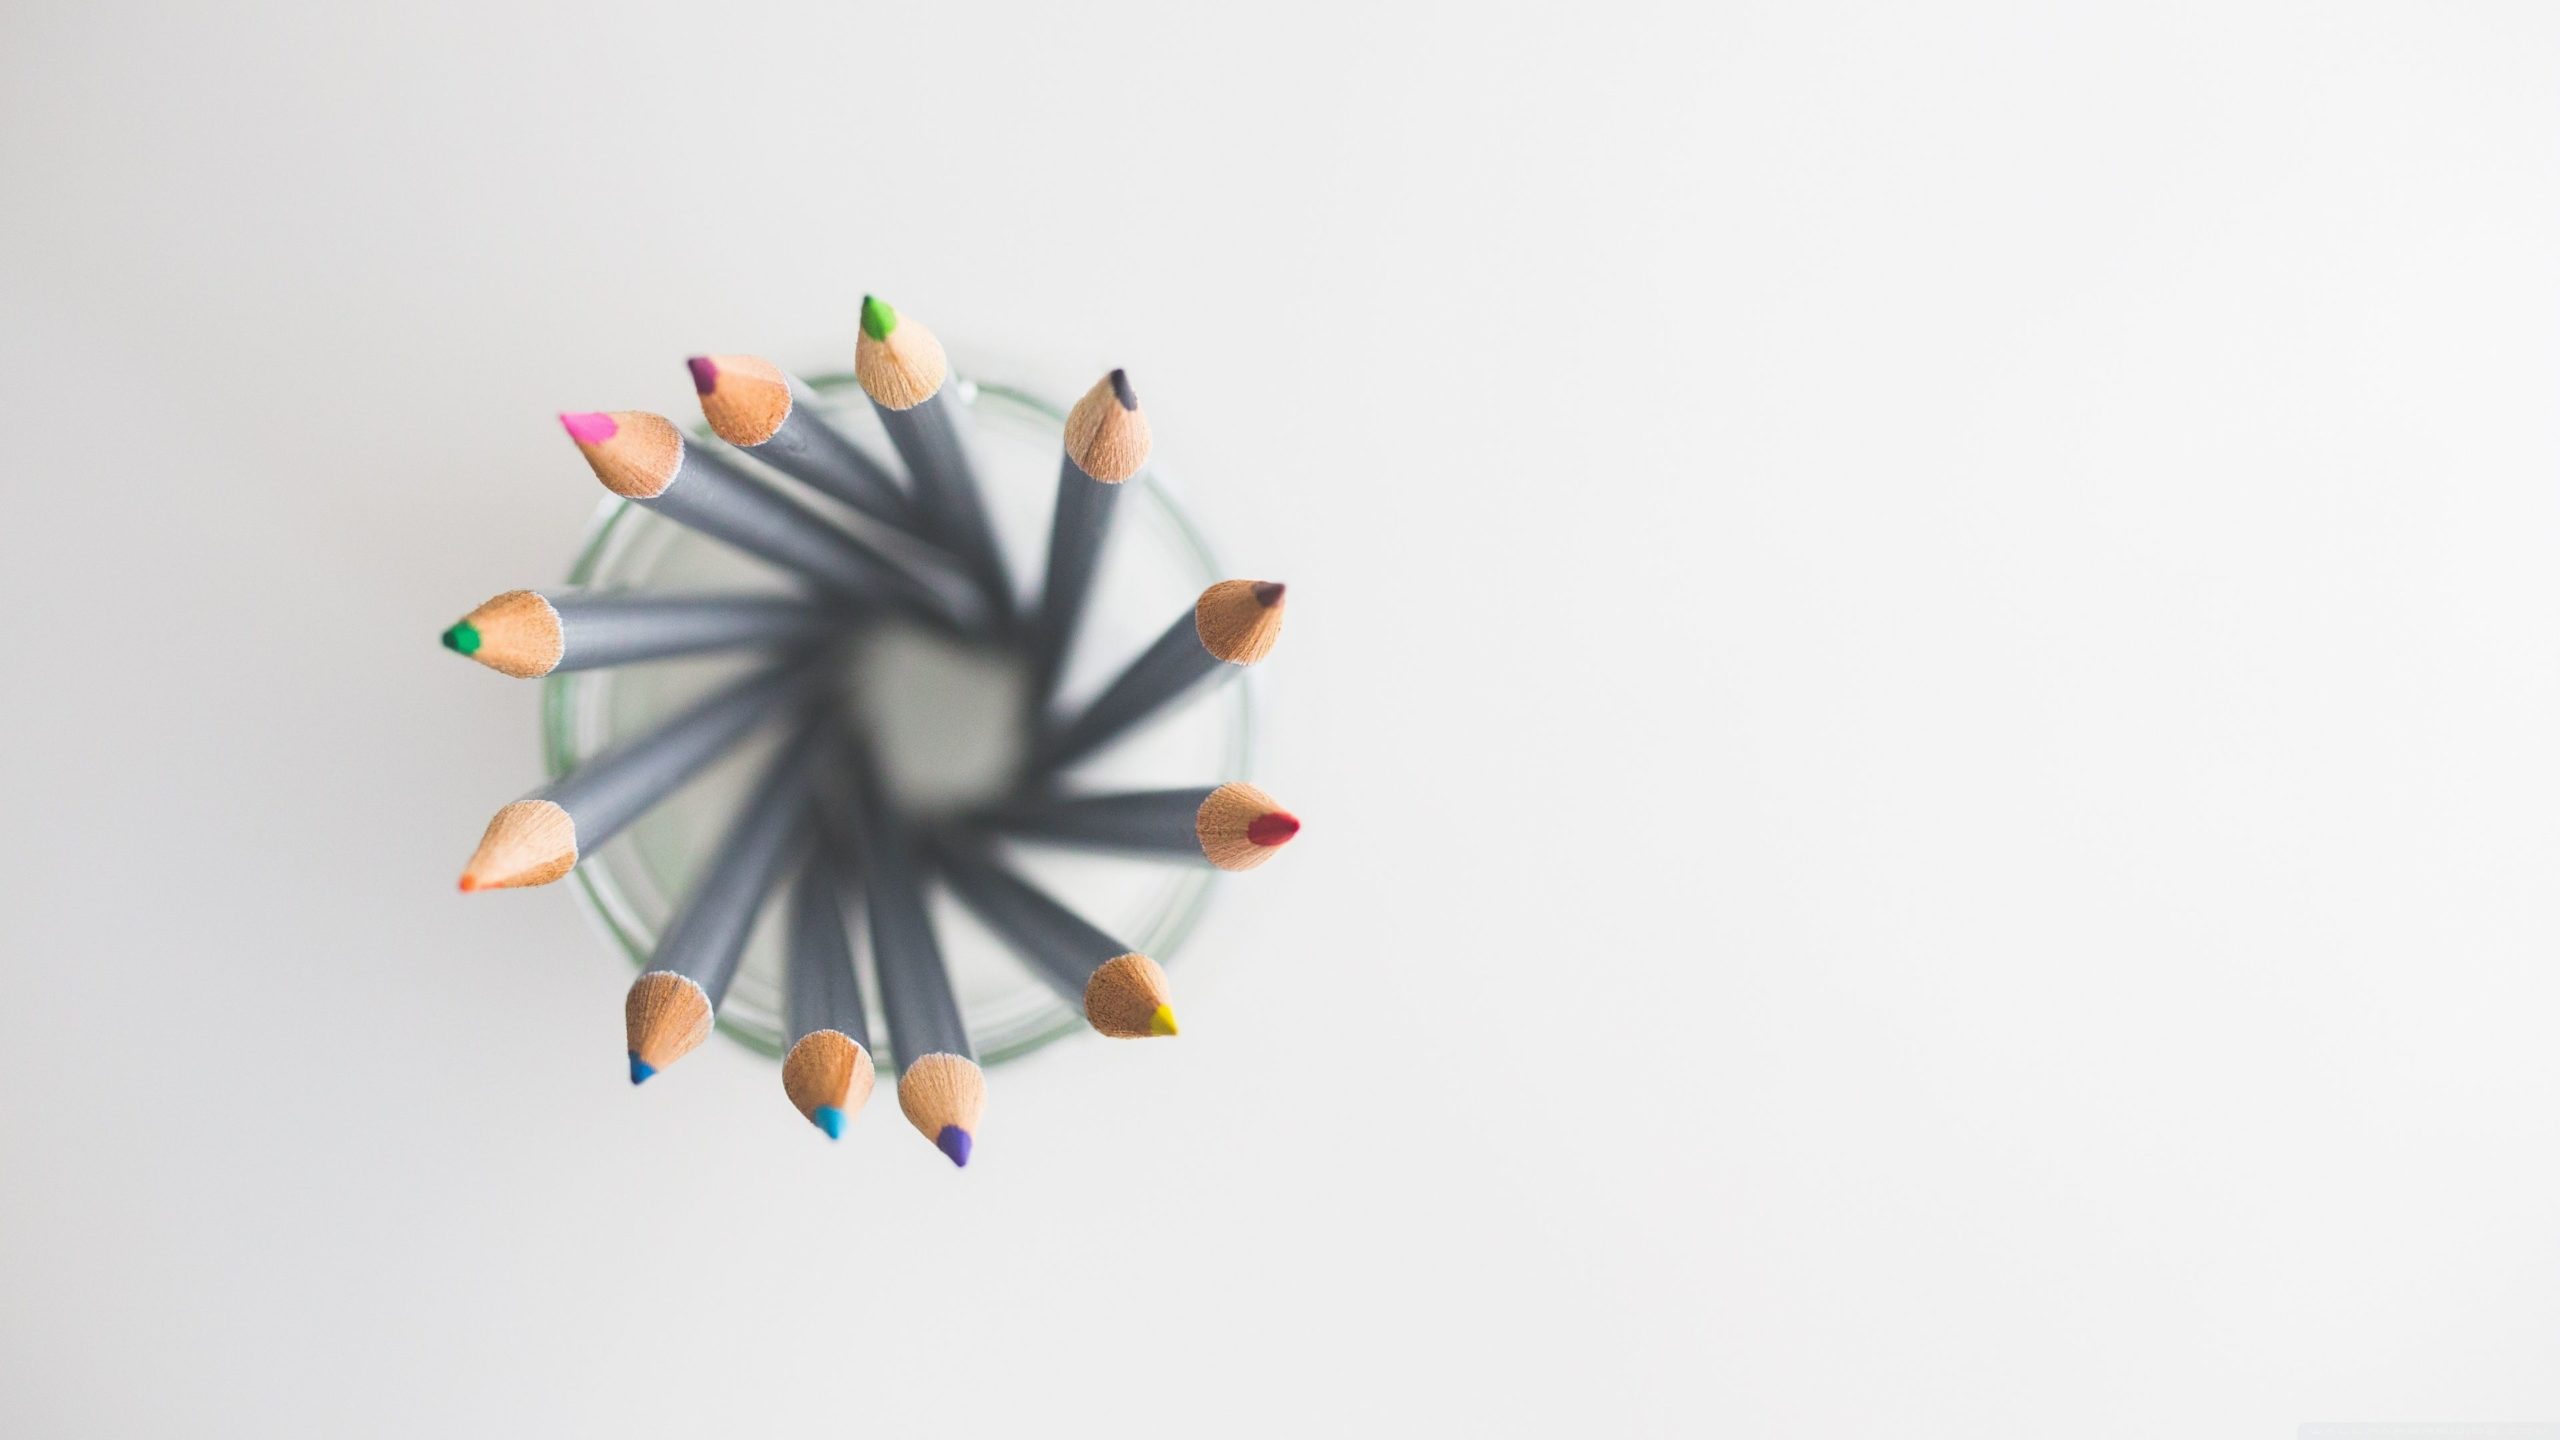 pencil stock images